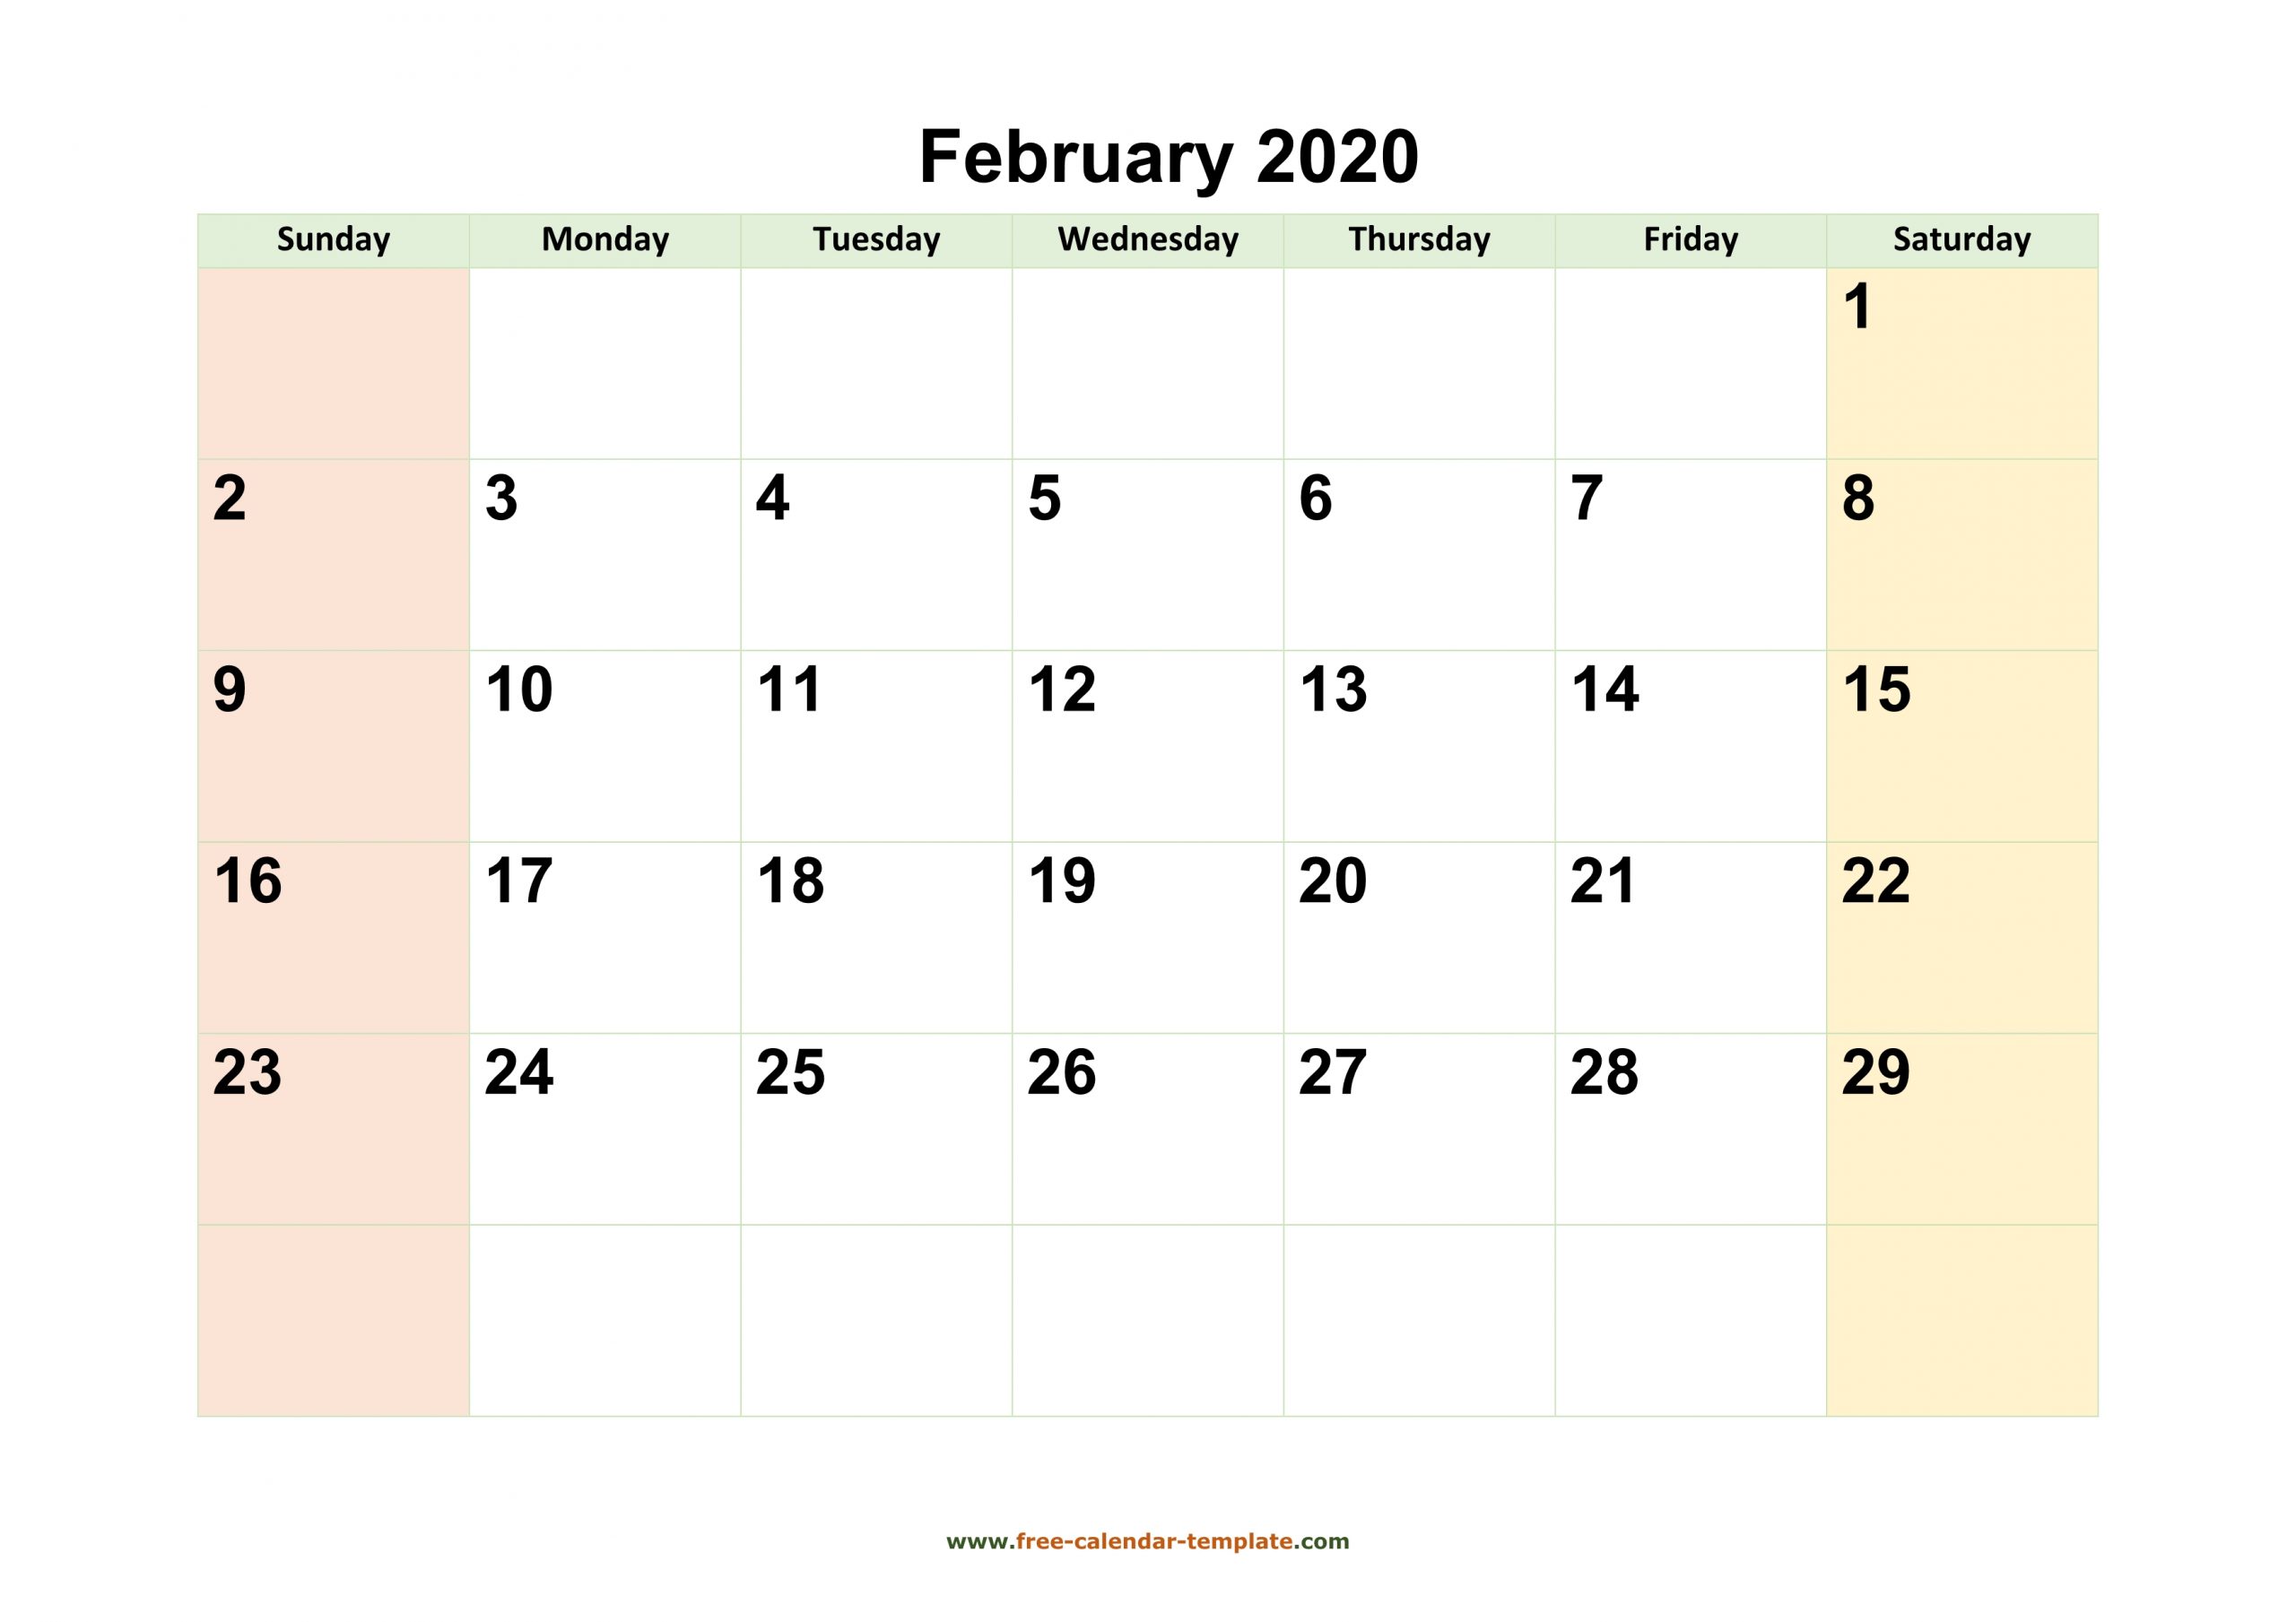 February 2020 Calendar Printable With Coloring On Weekend